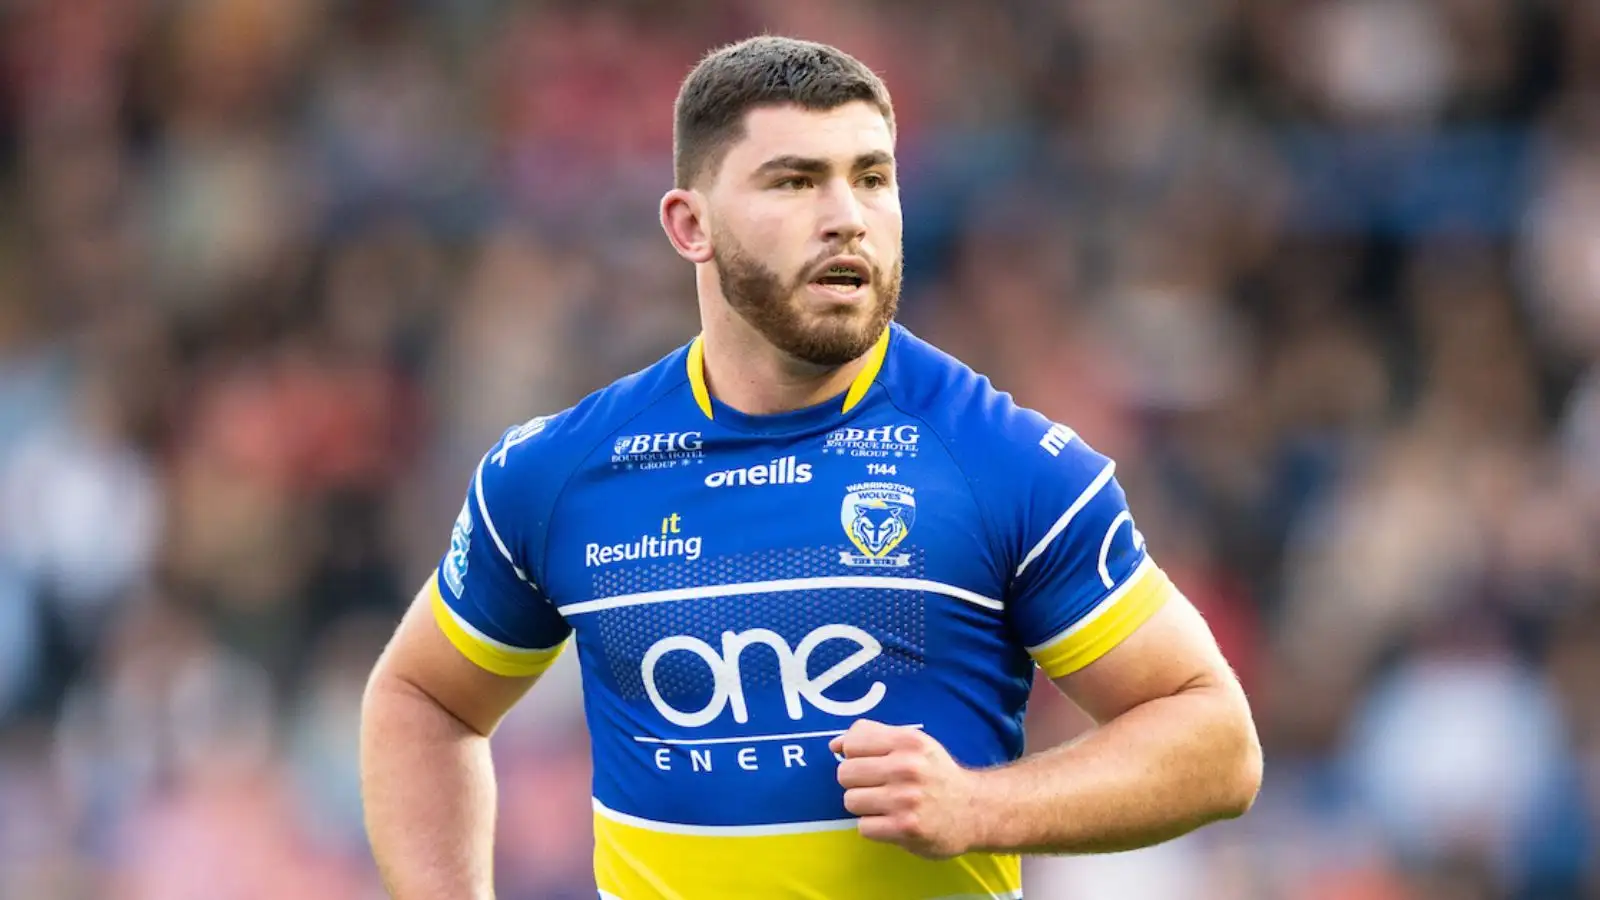 Ireland international makes League 1 move after French stint